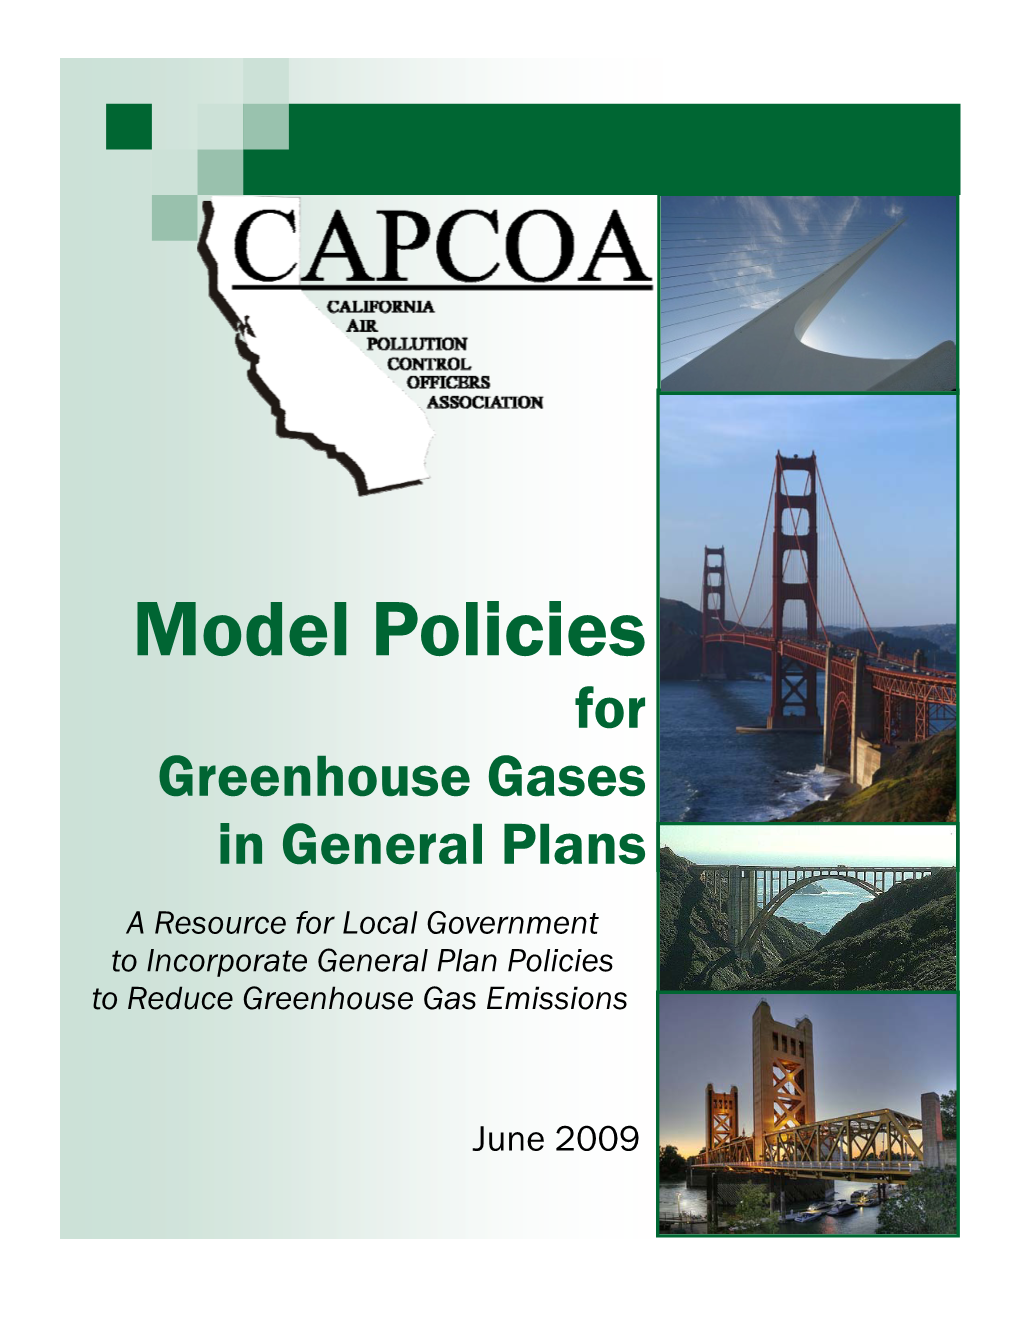 Model Policies for Greenhouse Gases in General Plans a Resource for Local Government to Incorporate General Plan Policies to Reduce Greenhouse Gas Emissions